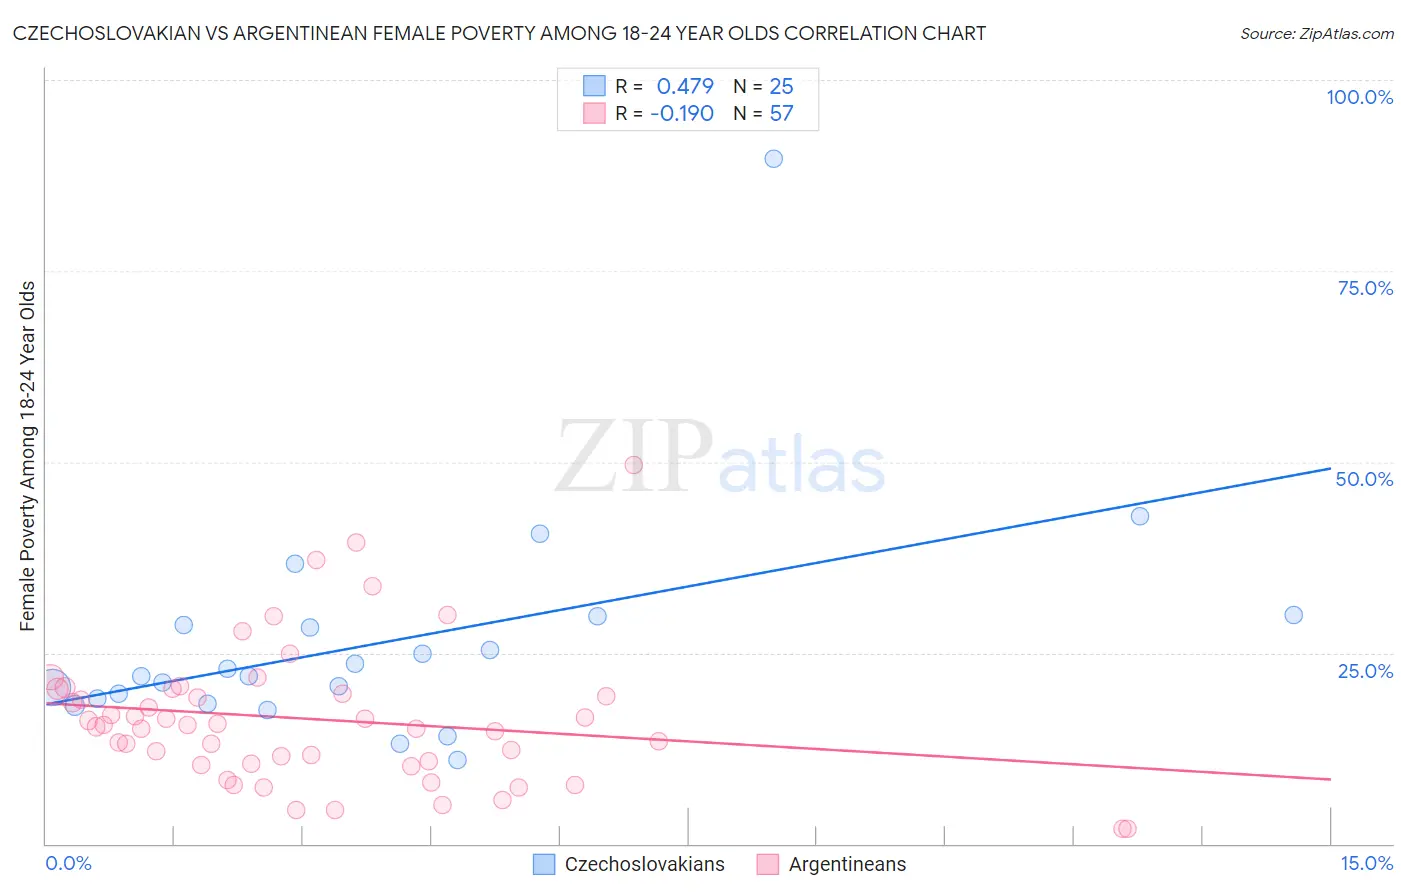 Czechoslovakian vs Argentinean Female Poverty Among 18-24 Year Olds